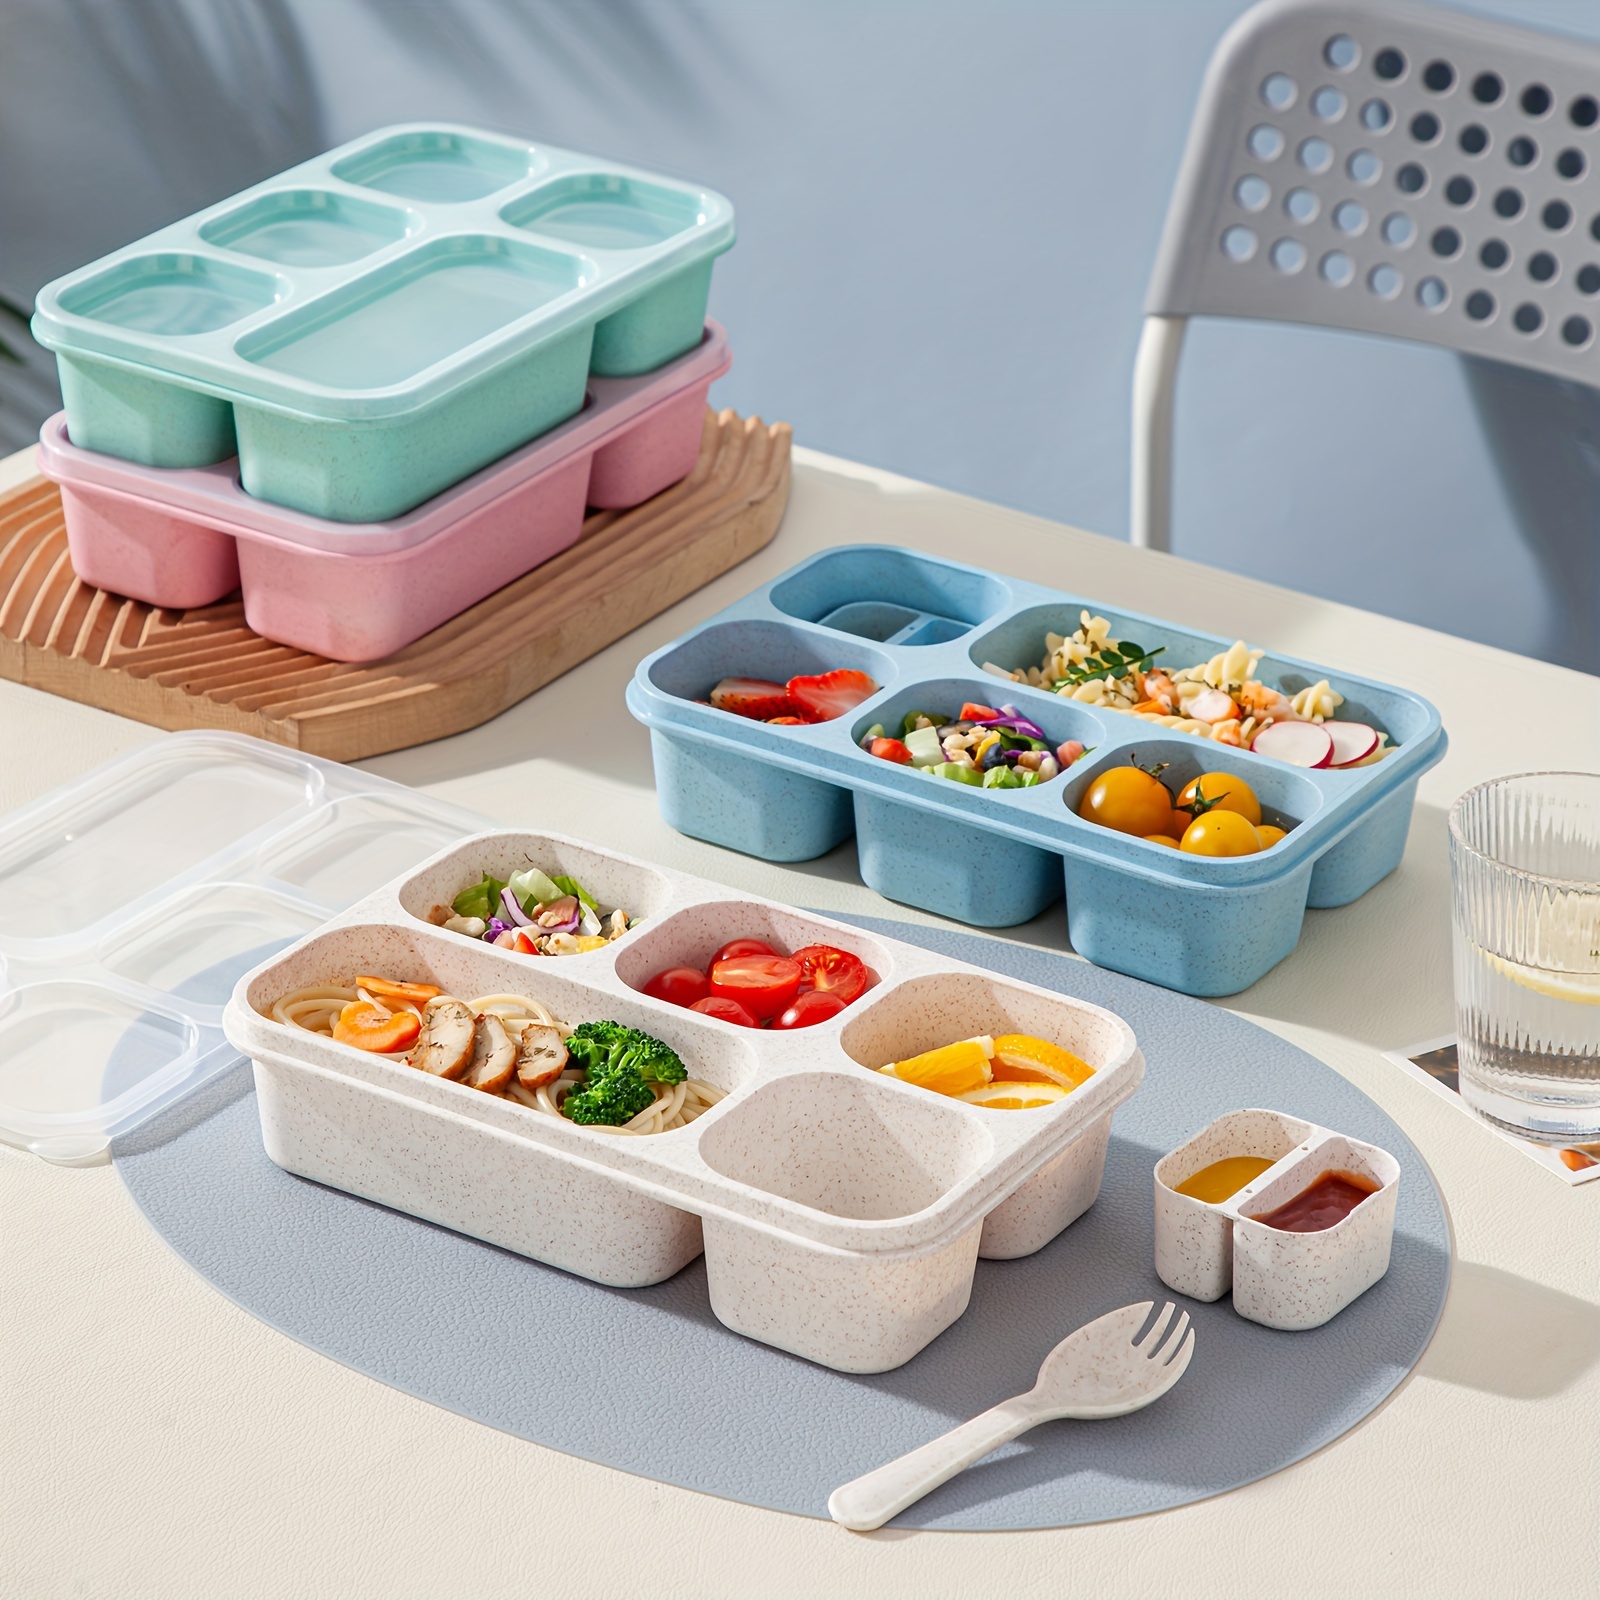 26 OZ Stackable Meal Prep Containers, Microwavable Reusable Containers with  Lids for Food Prepping, Disposable Lunch Boxes - AliExpress